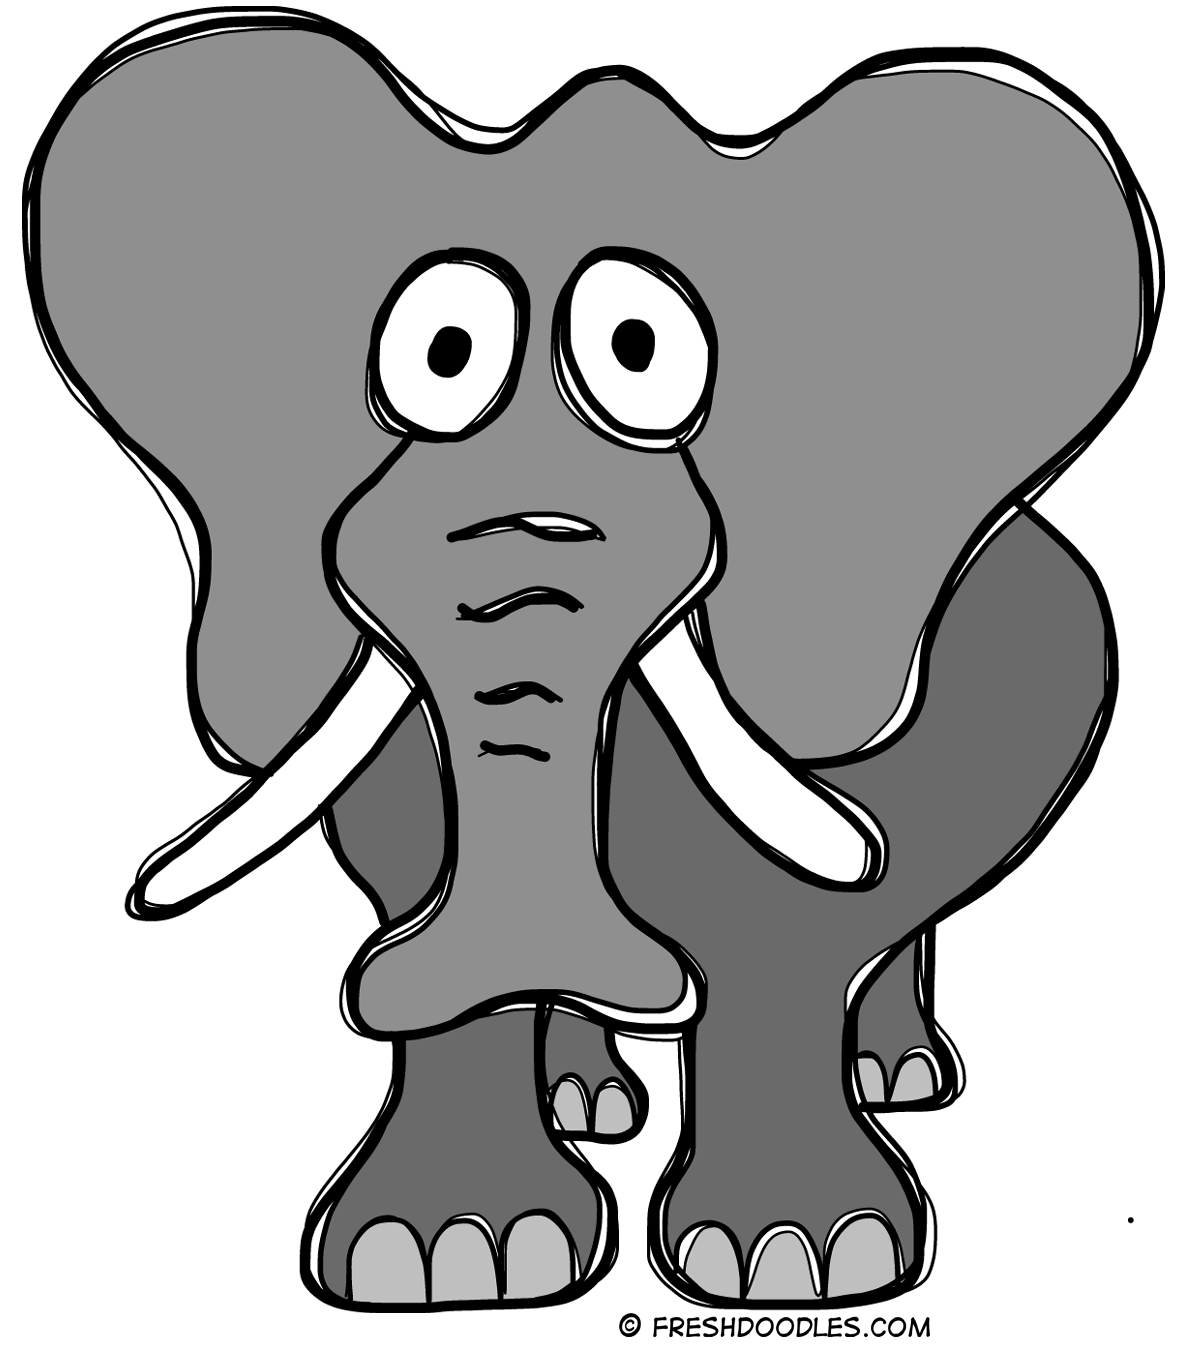 Fresh doodles free printable posters for kids elephant clip art